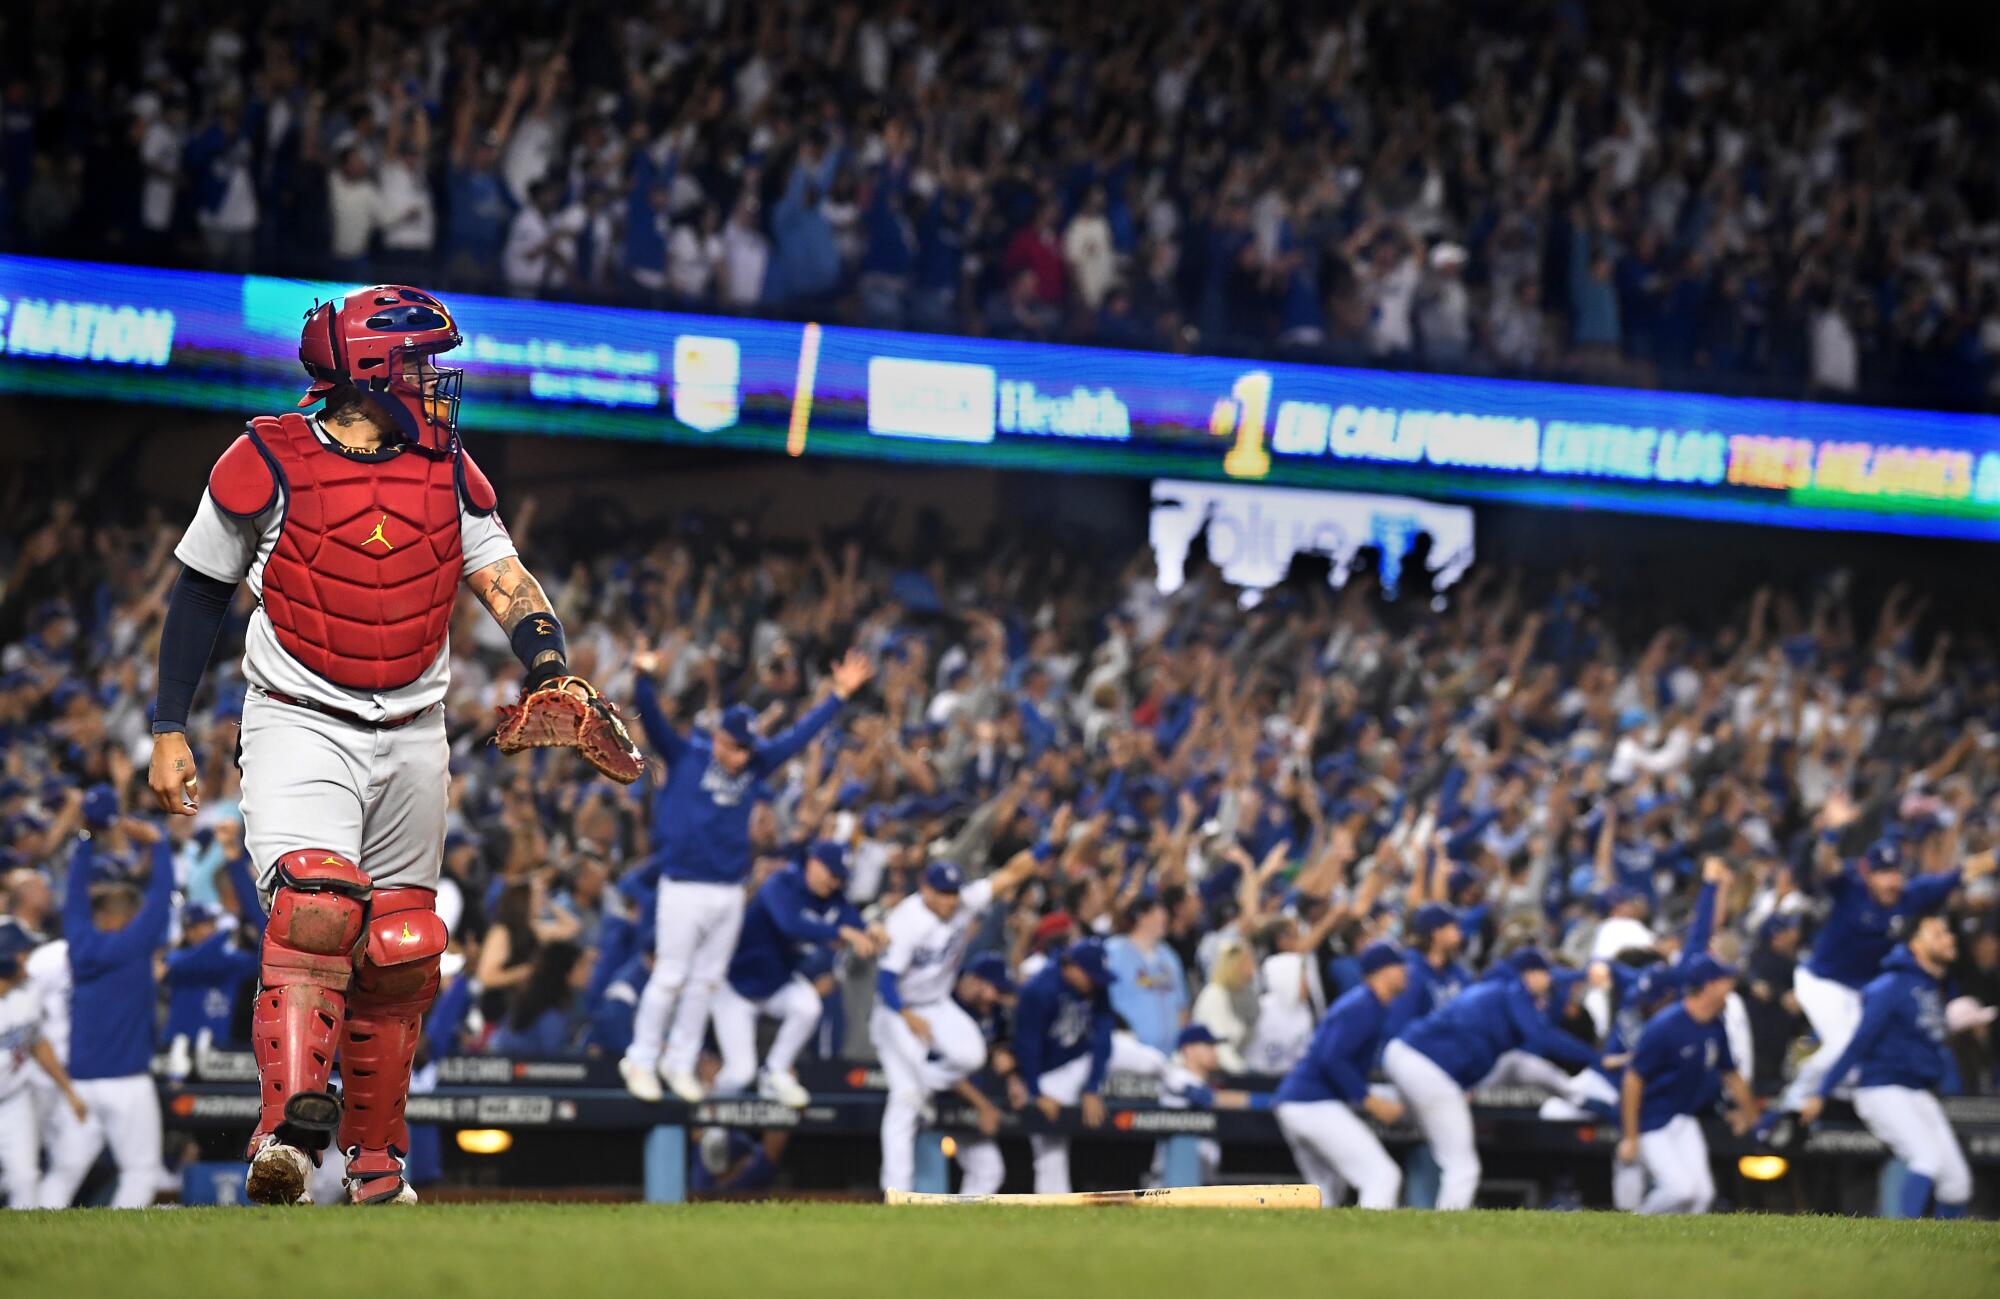 St. Louis Cardinals catcher Yadier Molina walks off the field as the Dodgers pour out of the dugout to celebrate.